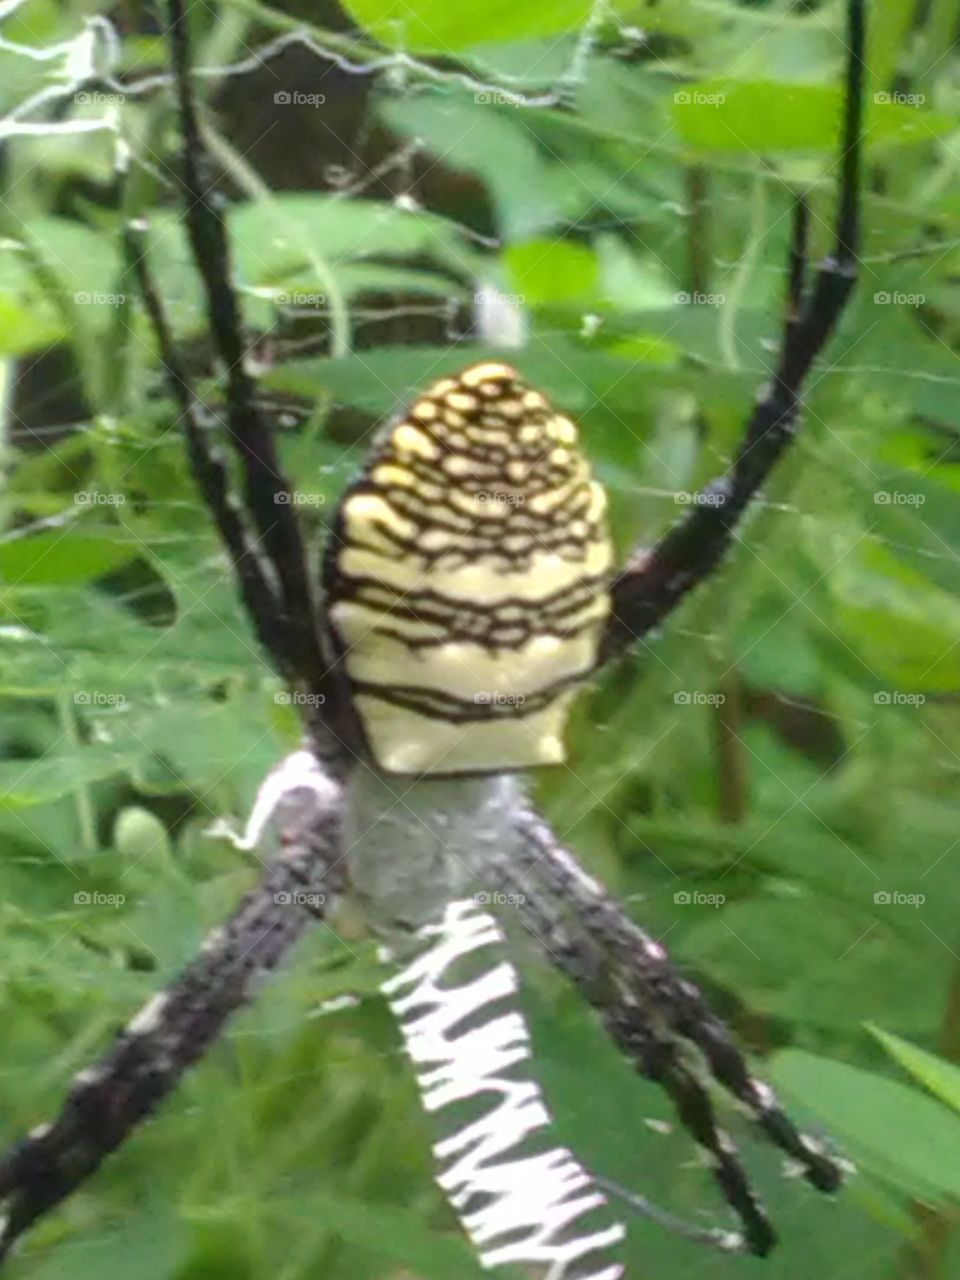 This spider creates a trap for itself and lives in it, and if a worm fades in it then it becomes its food.